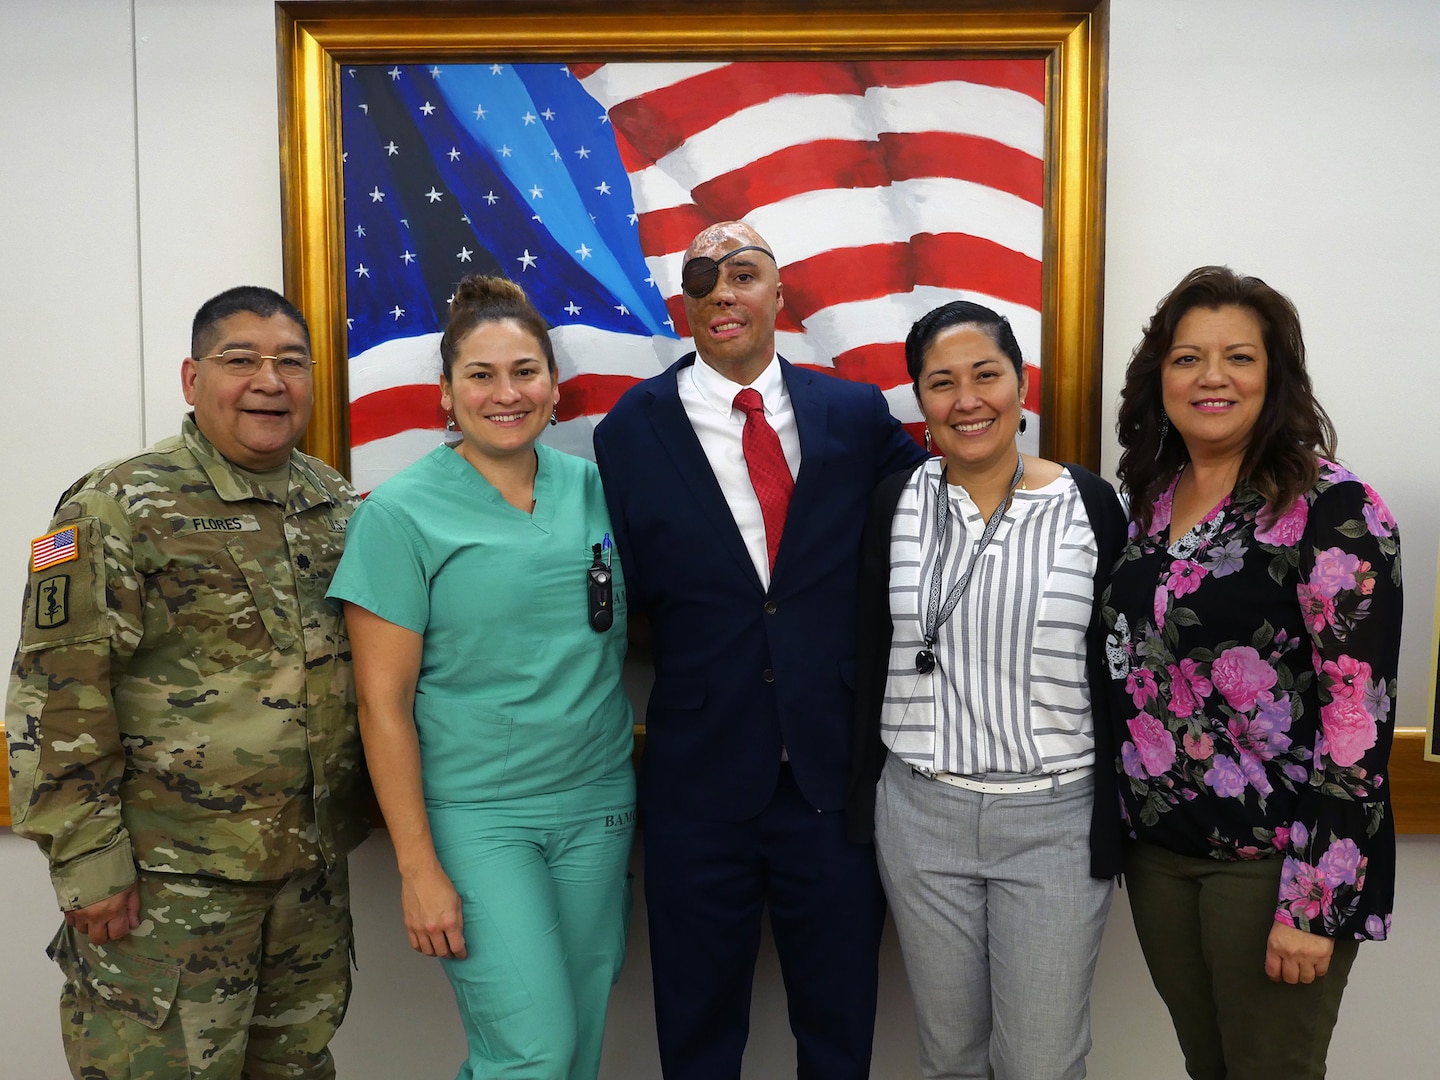 Retired Sgt. Mario Lopez poses for a photo with Brooke Army Medical Center staff members after his painting of the American flag is unveiled in the Medical Mall of the hospital at Joint Base San Antonio-Fort Sam Houston. Lopez, a former BAMC patient who was severely injured in an IED attack in Afghanistan in 2008, learned to use painting therapeutically to help him overcome an array of challenges he has faced over the past decade. The painting was donated to BAMC by former United Nations Ambassador Warren W. Tichenor.